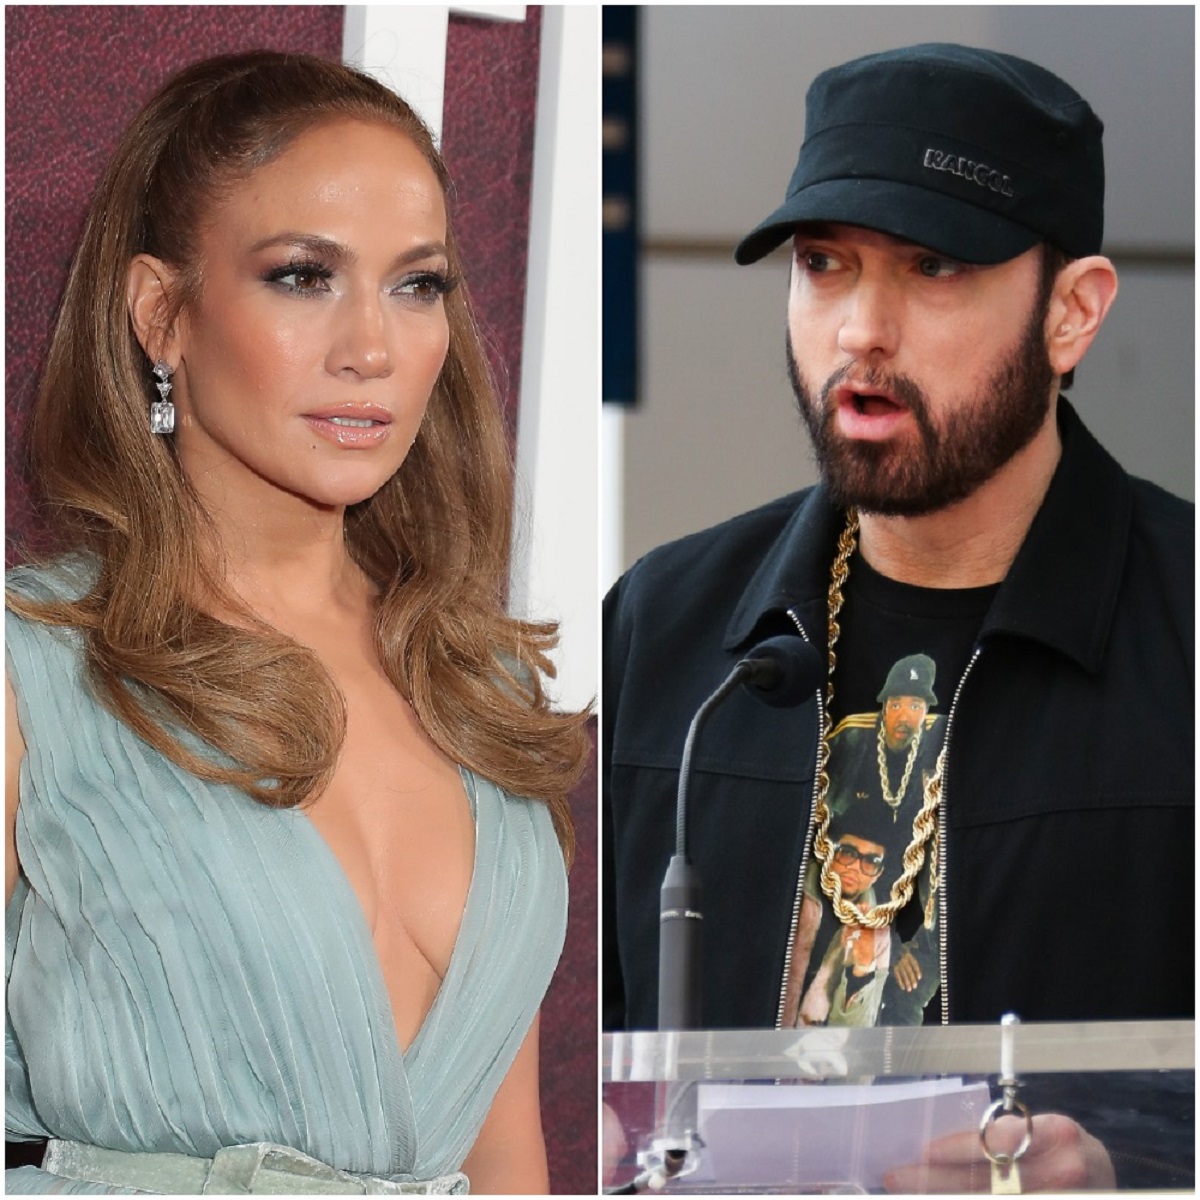 (L) Jennifer Lopez dons a pastel gown at a premiere in LA, (R) Eminem speaking a ceremony for 50 Cent’s star on Hollywood Walk of Fame